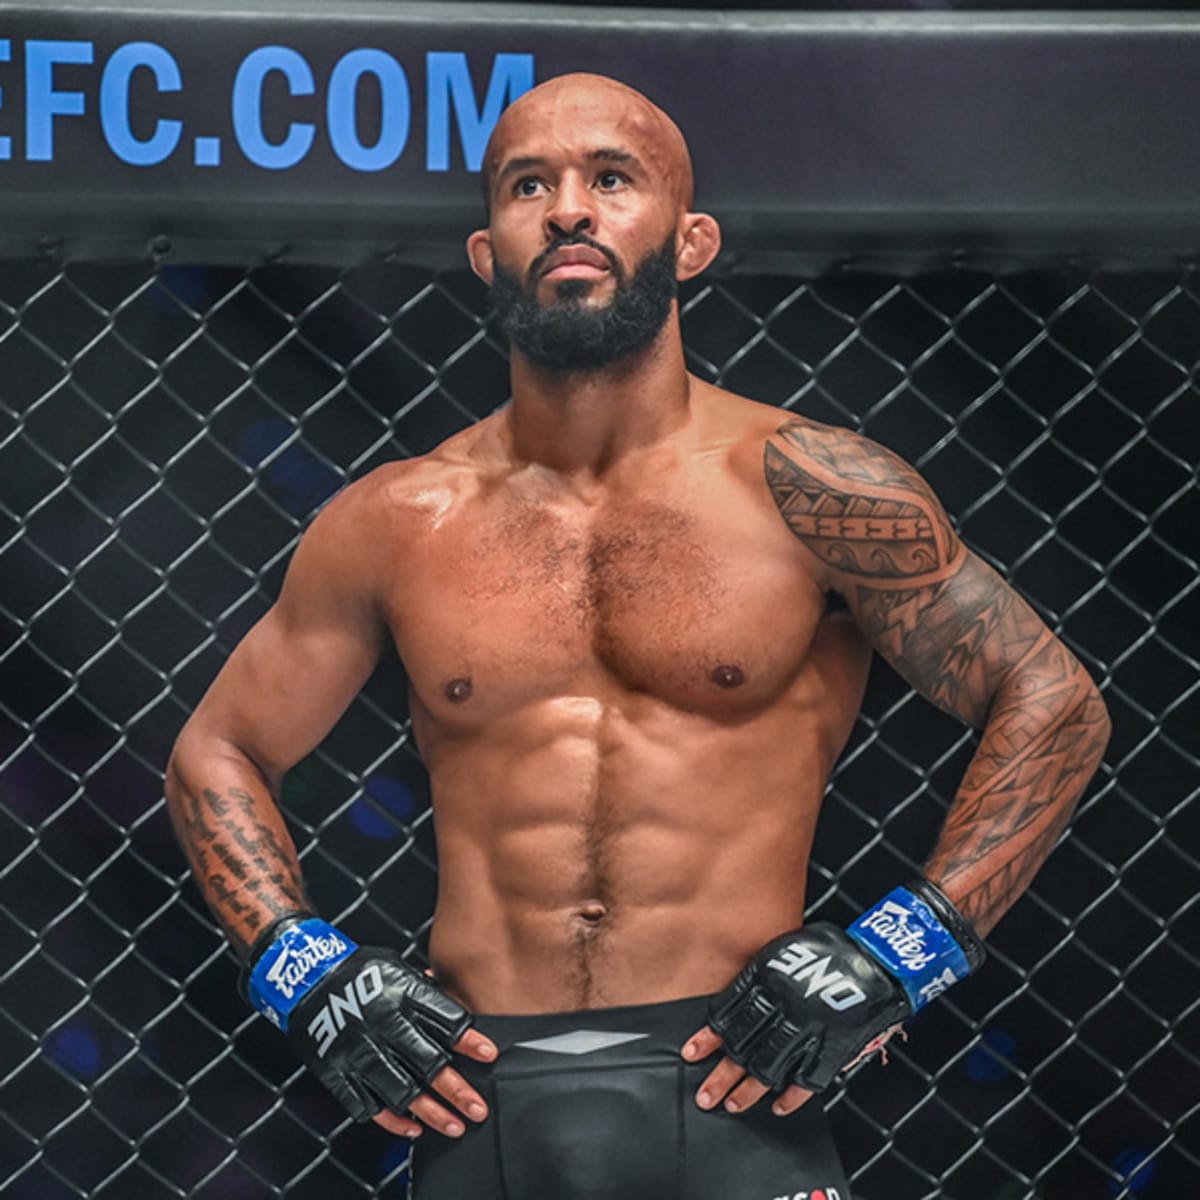 Mighty Mouse” Mulls Retirement After Winning ONE Championship Trilogy Bout 